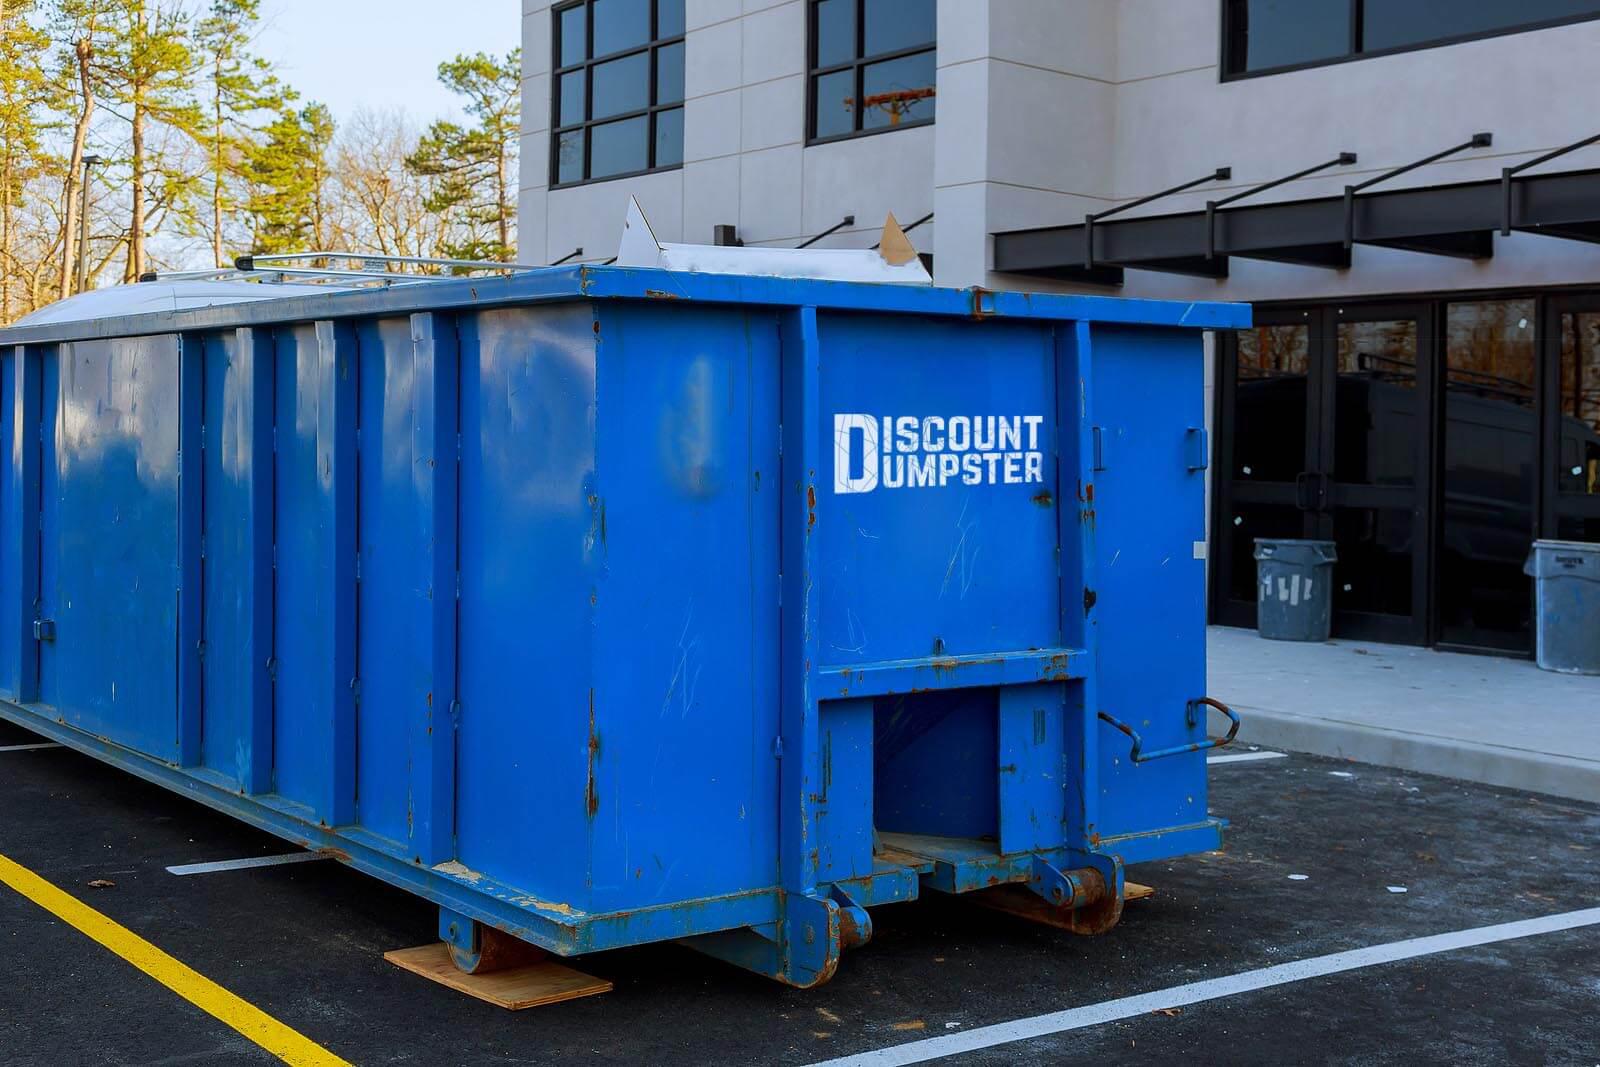 Discount dumpster has quality roll off dumpsters in chicago il for your home or commercial needs Discount Dumpster Chicago (312)549-9198